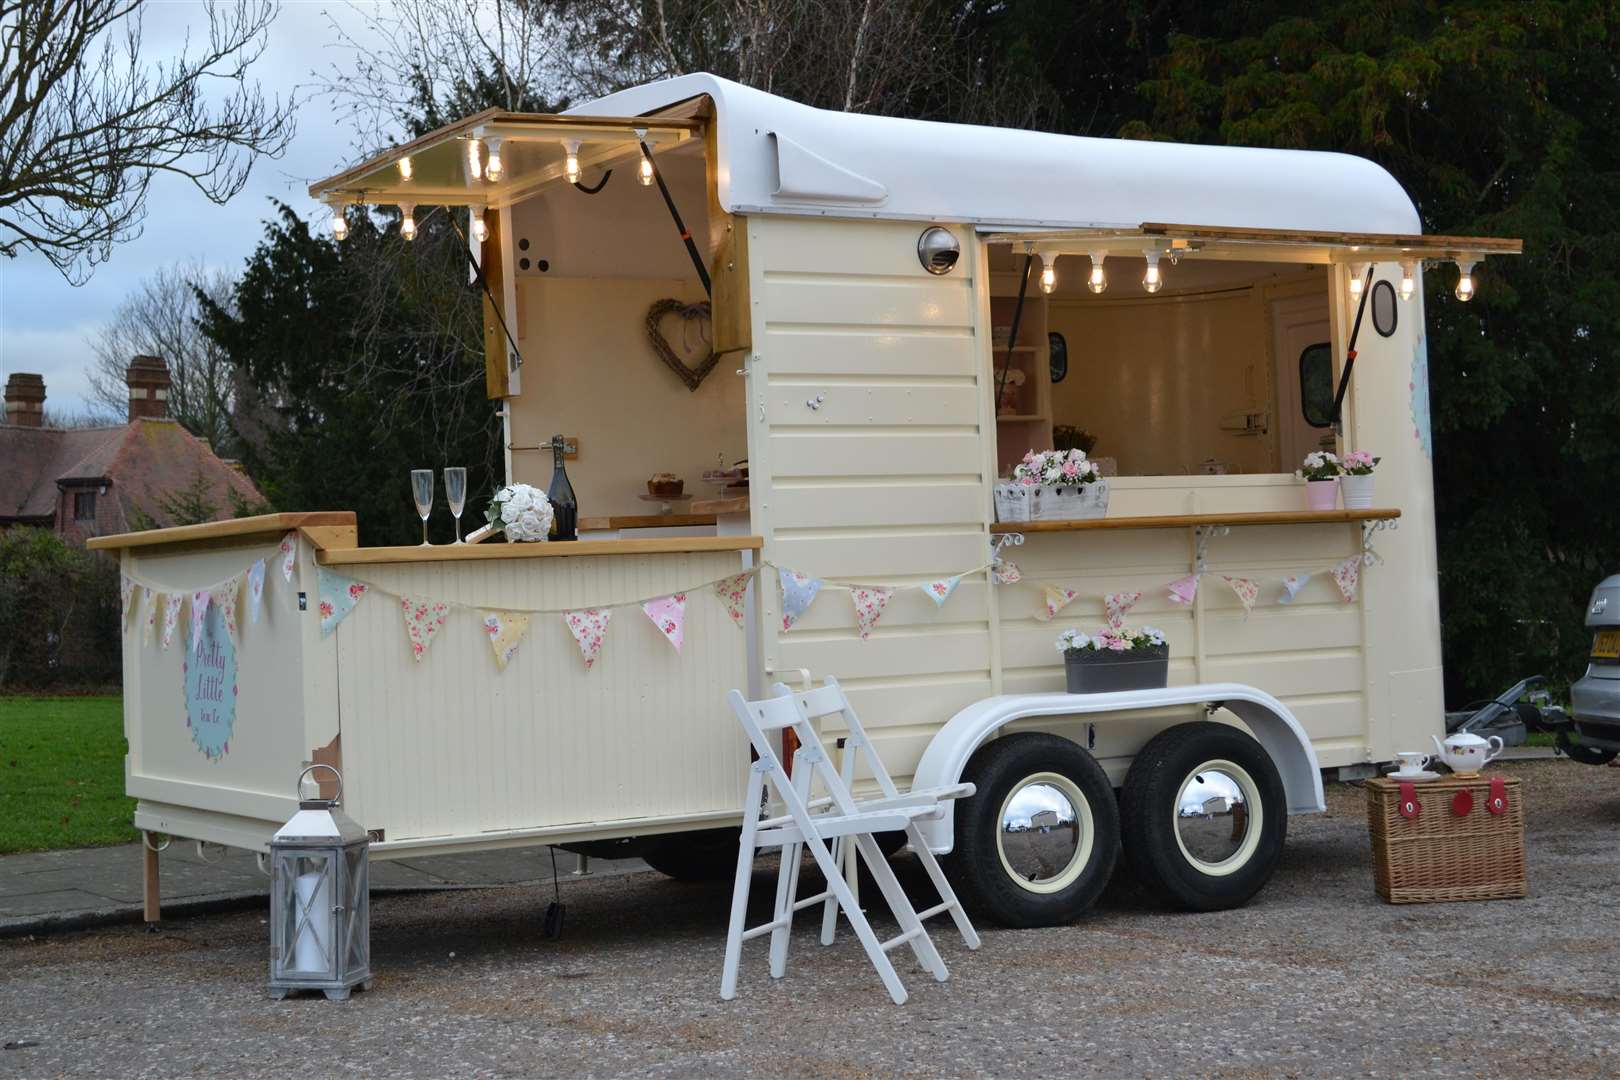 Vintage horsebox, Rosie, was fitted with bespoke worktops, an up-cycled dresser and extending Prosecco bar